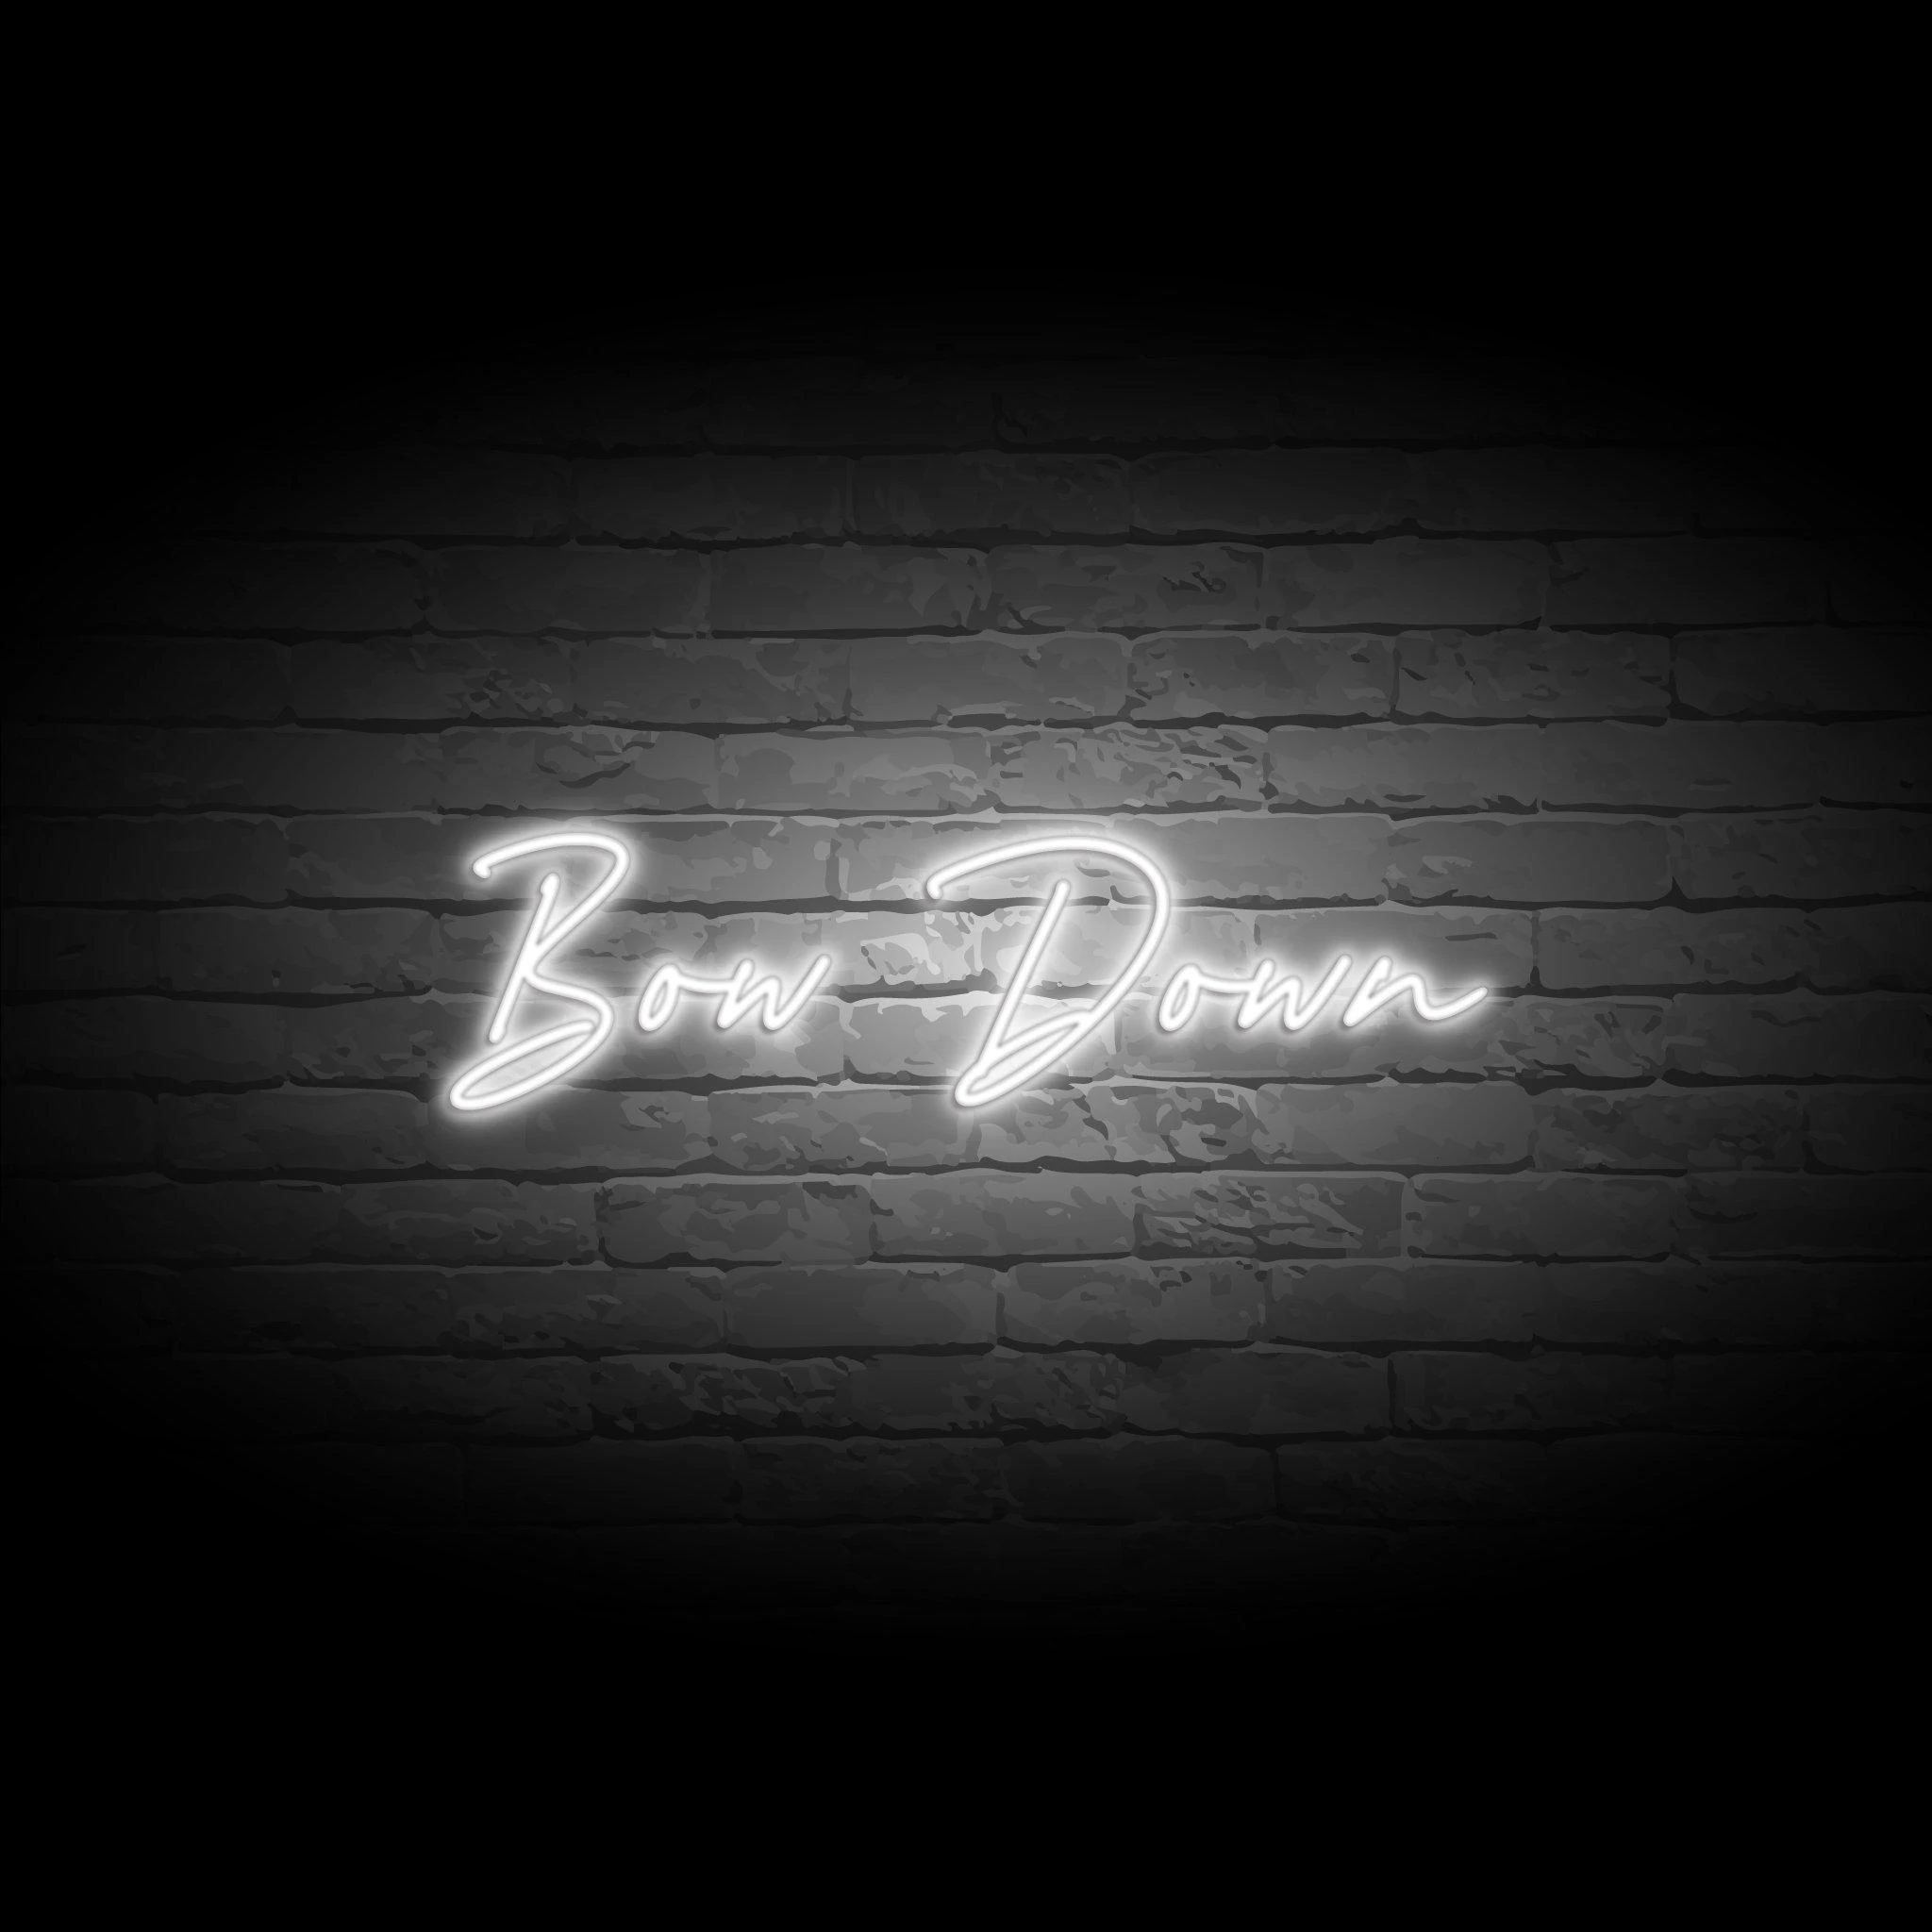 'BOW DOWN' NEON SIGN